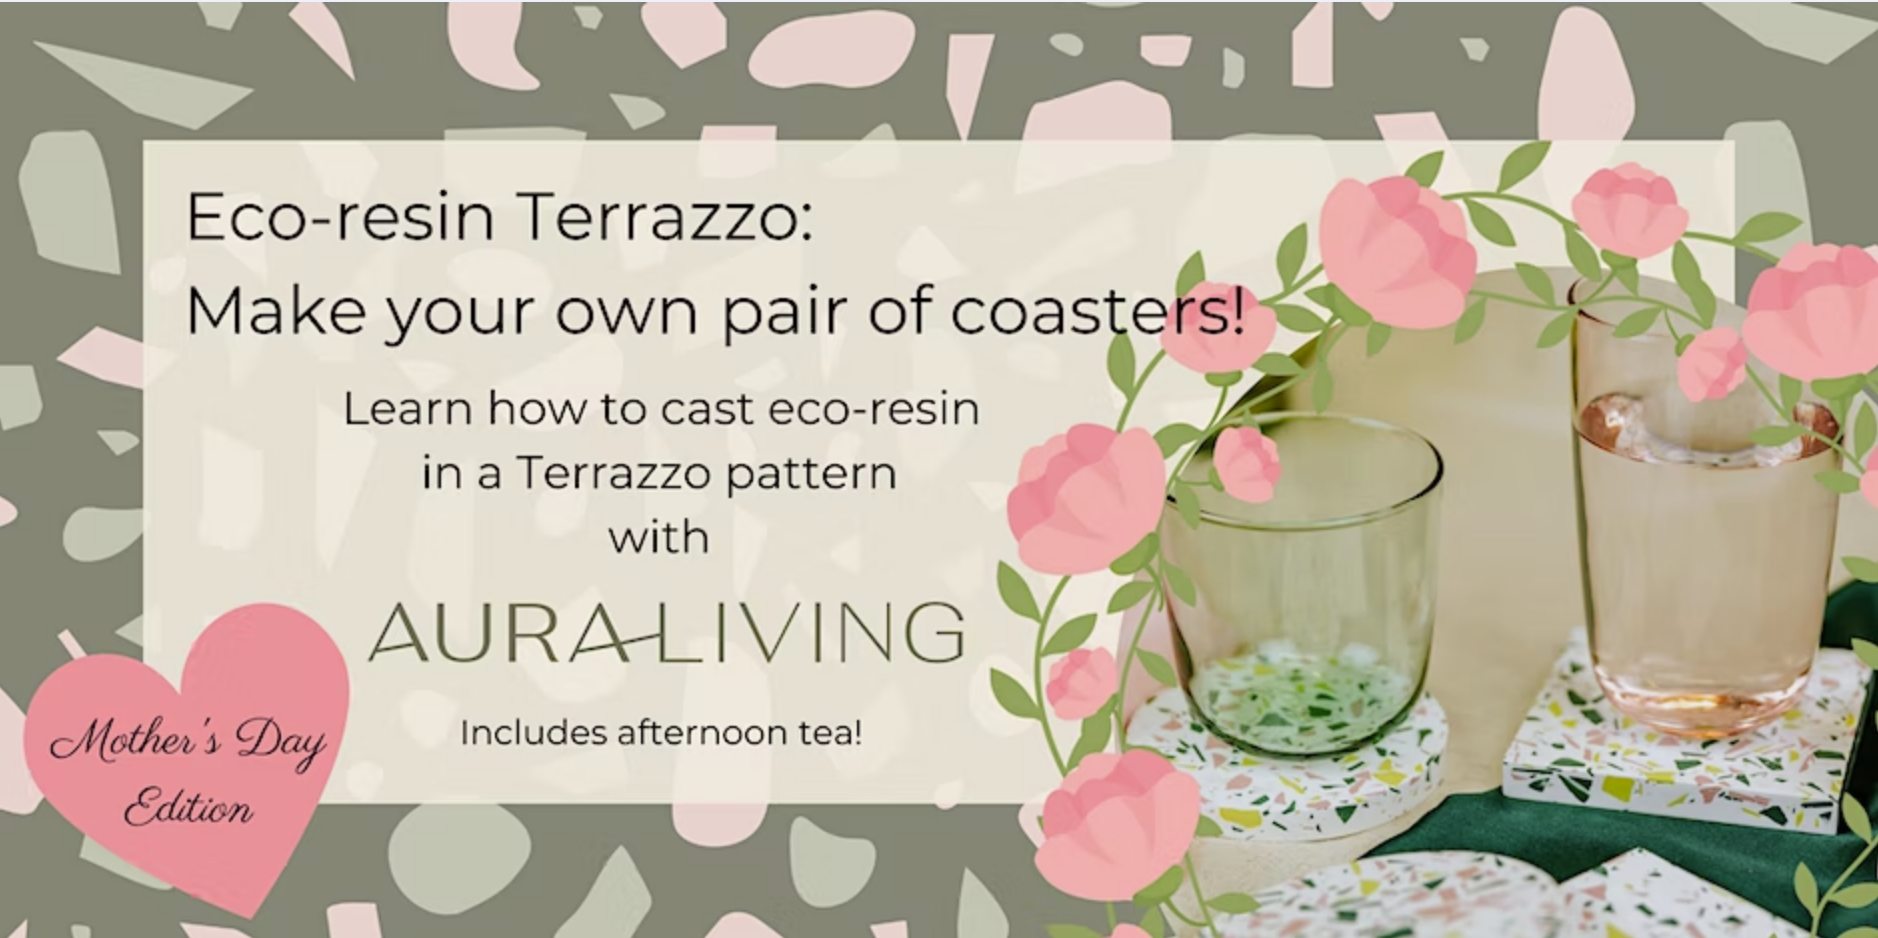 a terrazzo pattern with an image of some terrazzo coasters with flowers around and text about the class